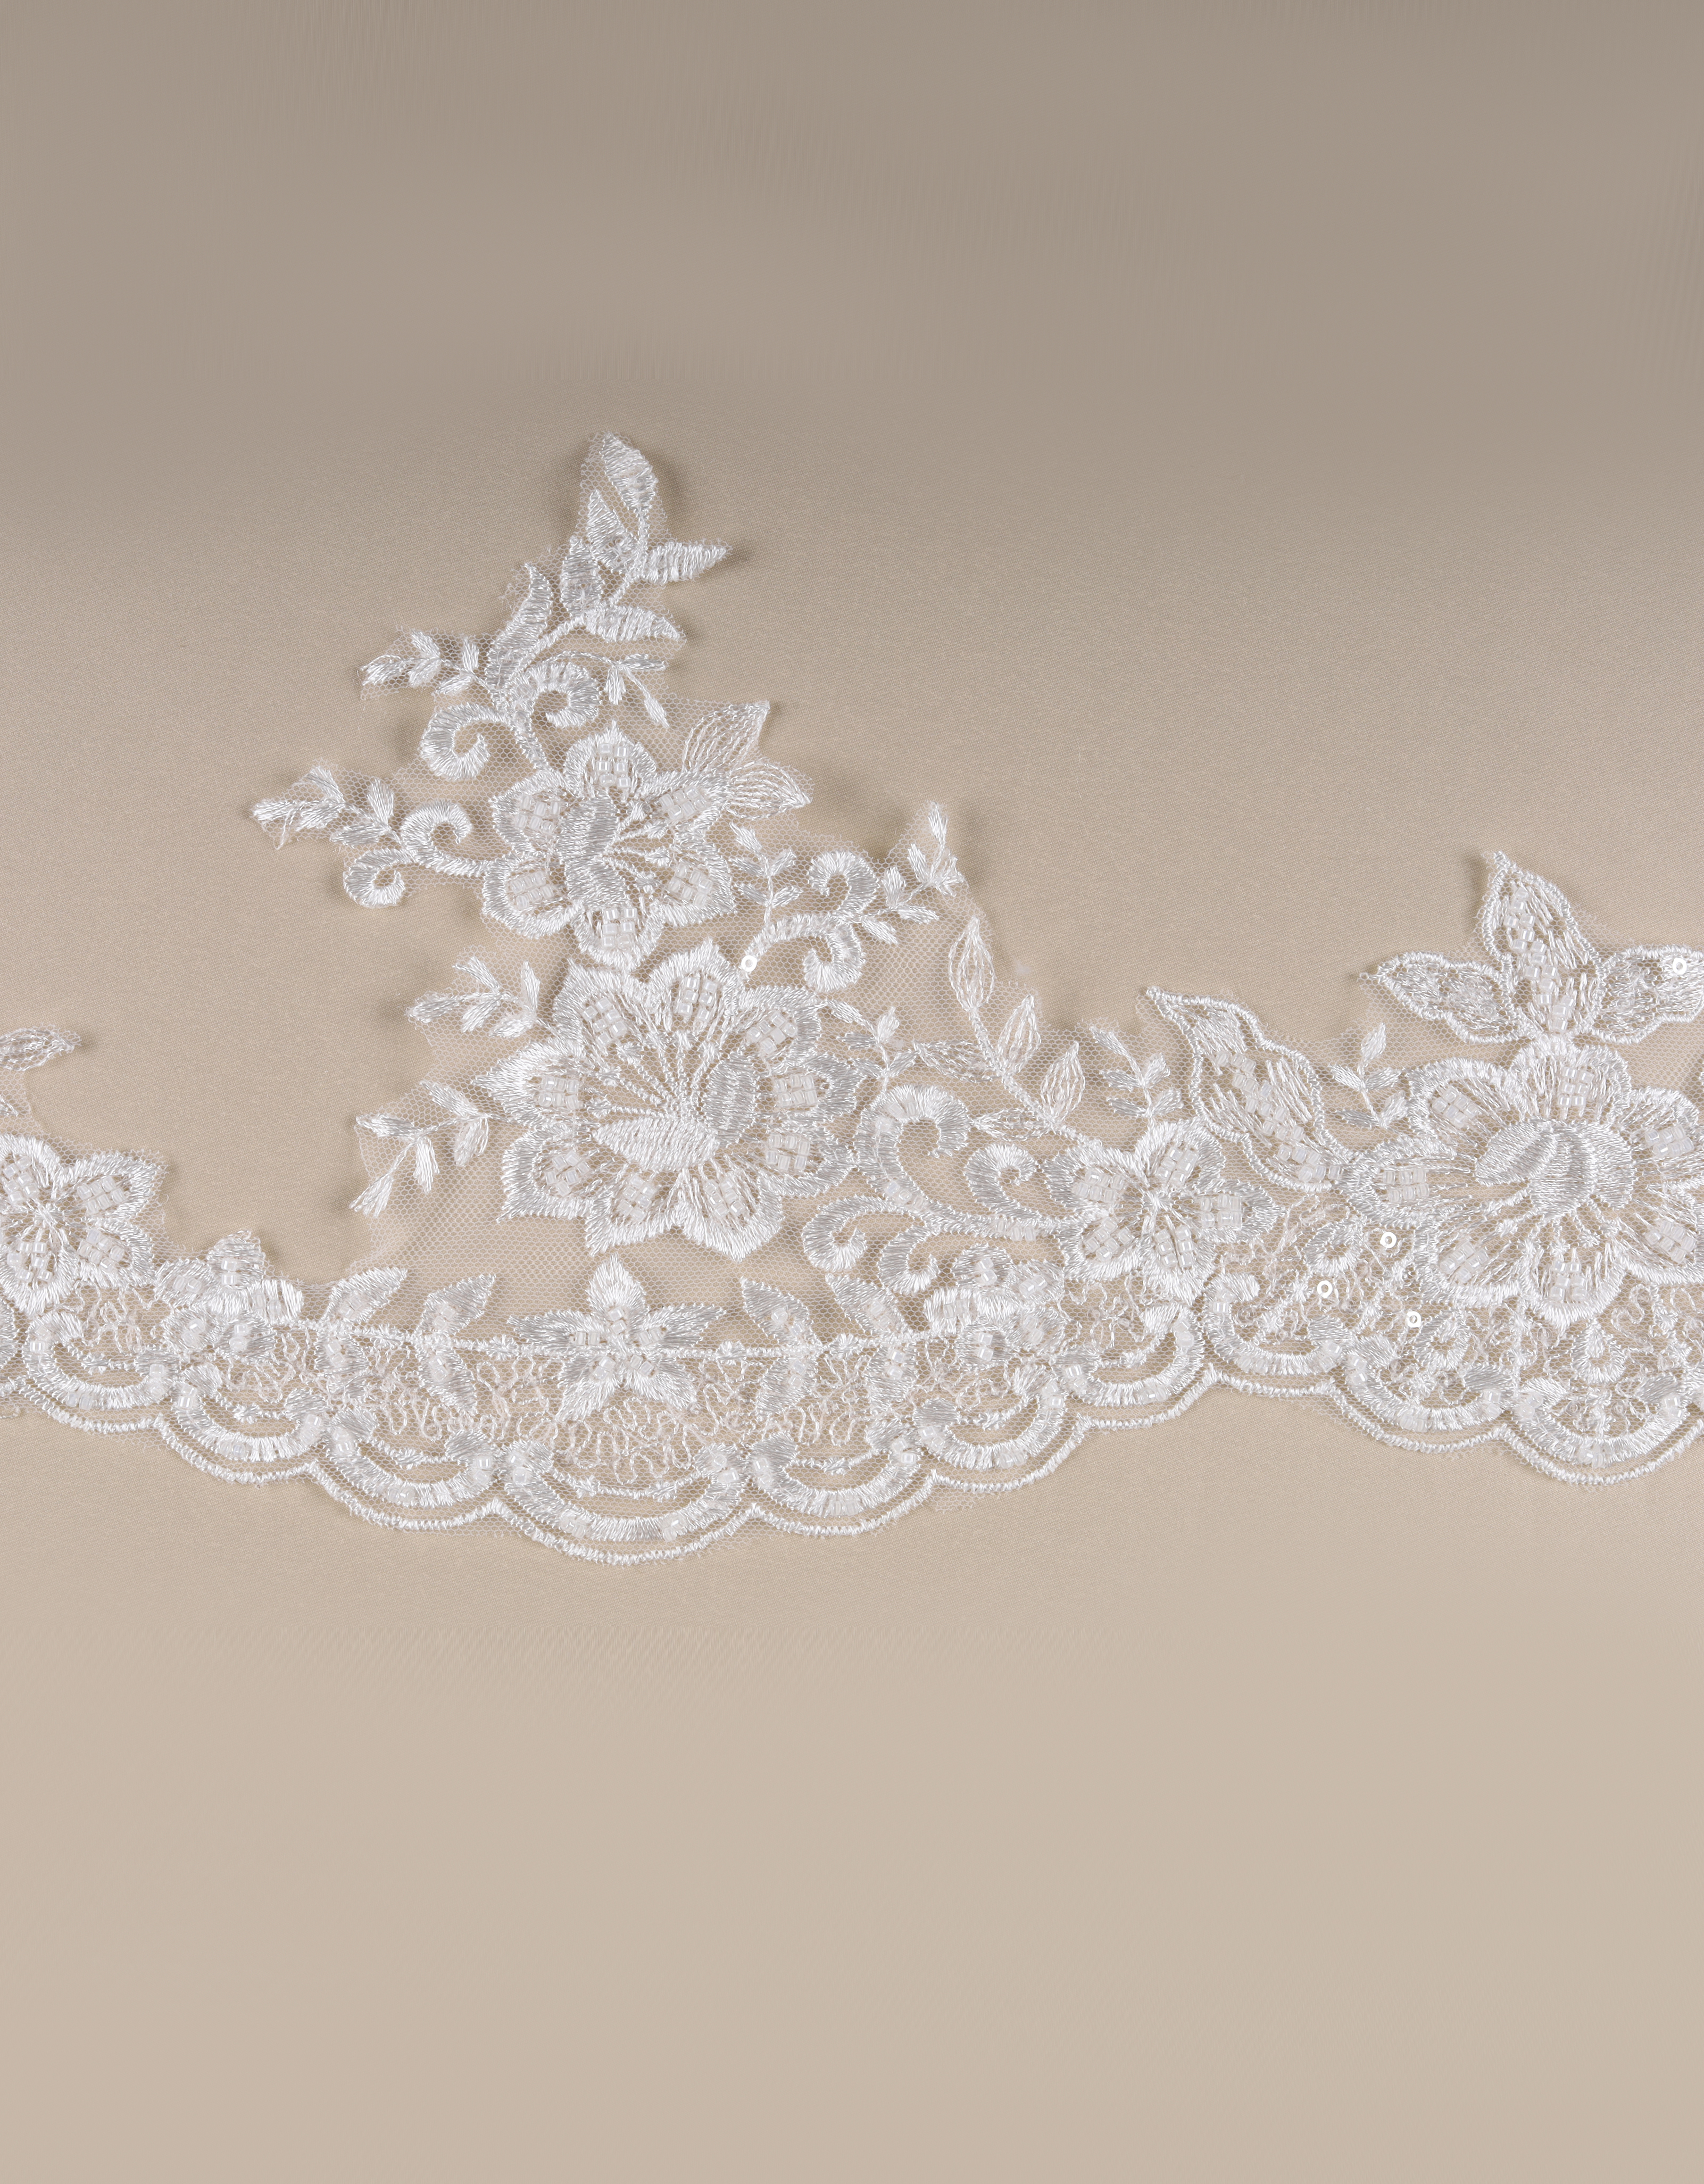 Cream Floral Lace with Lace and Pearls Border - CUP167310_422